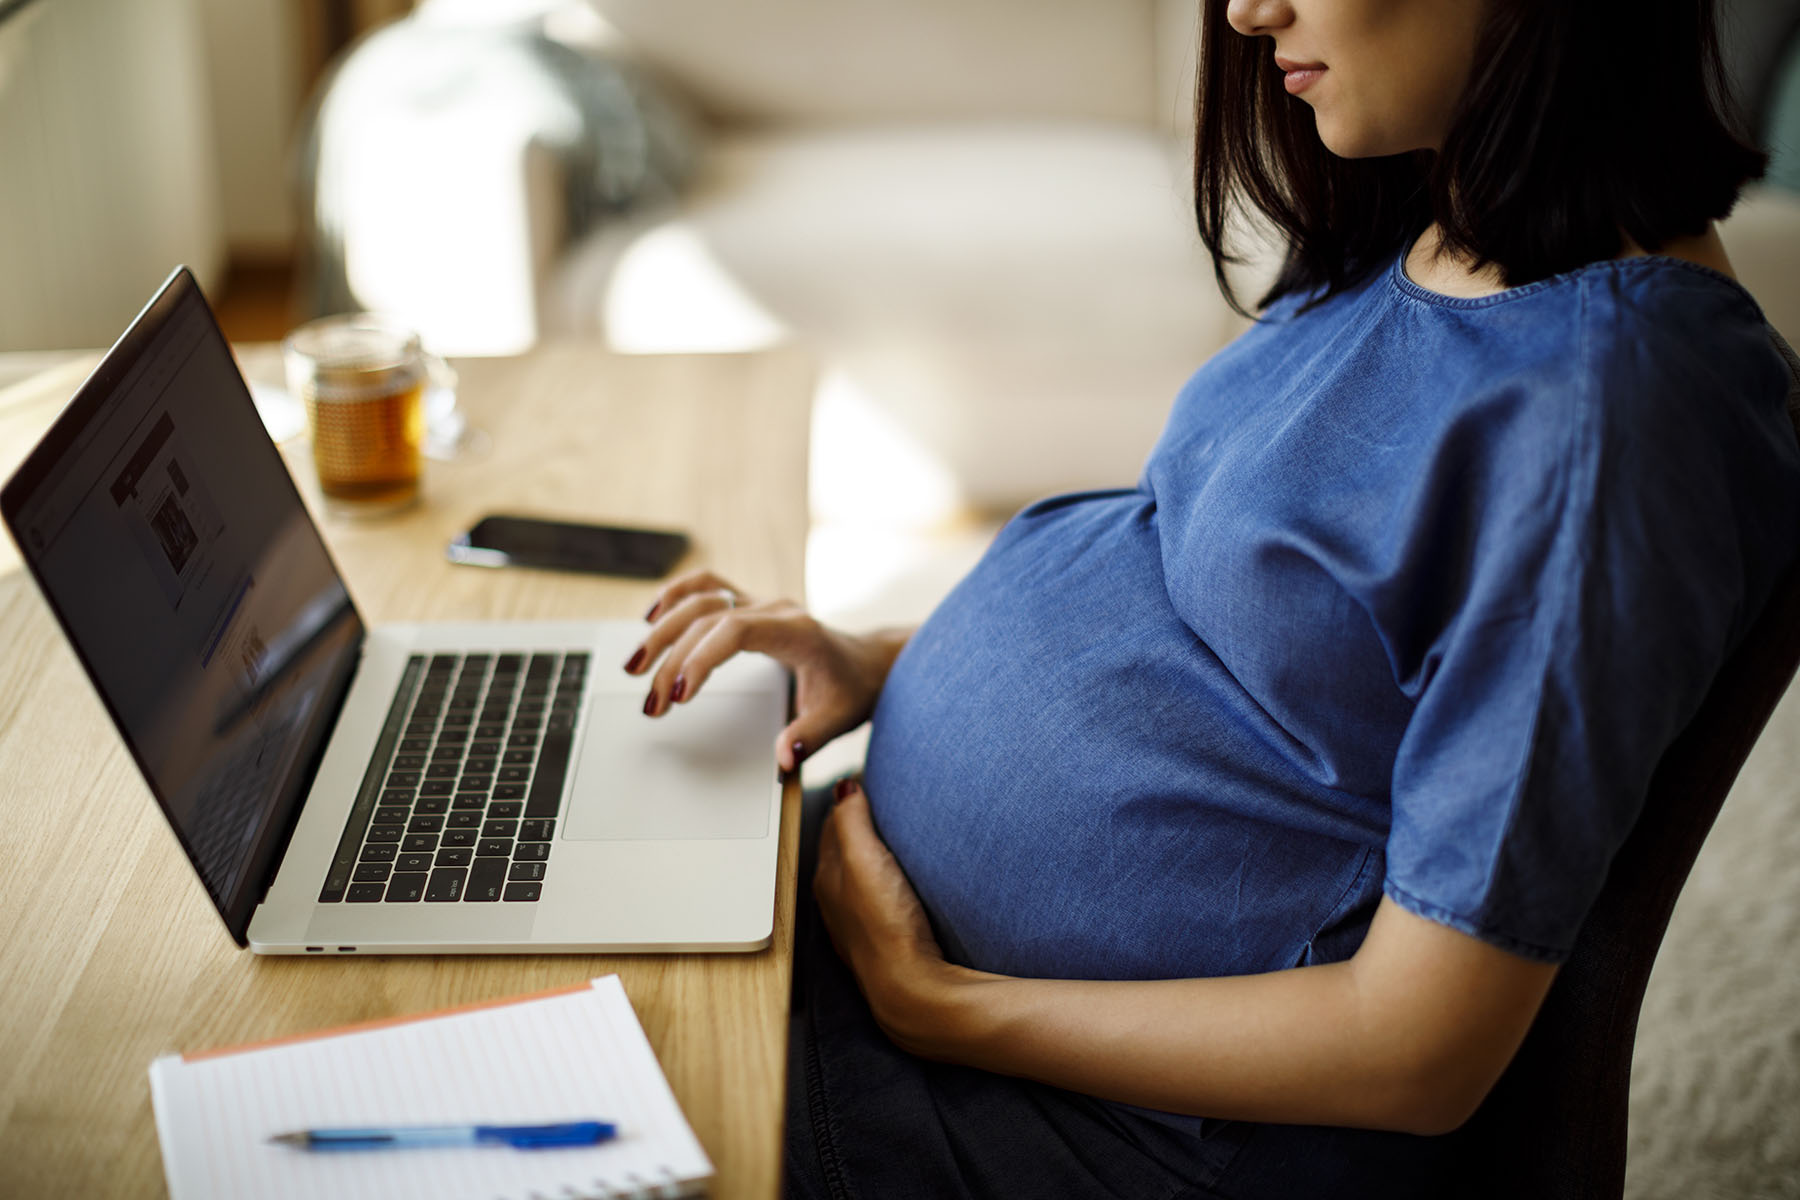 A pregnant woman works on a computer.